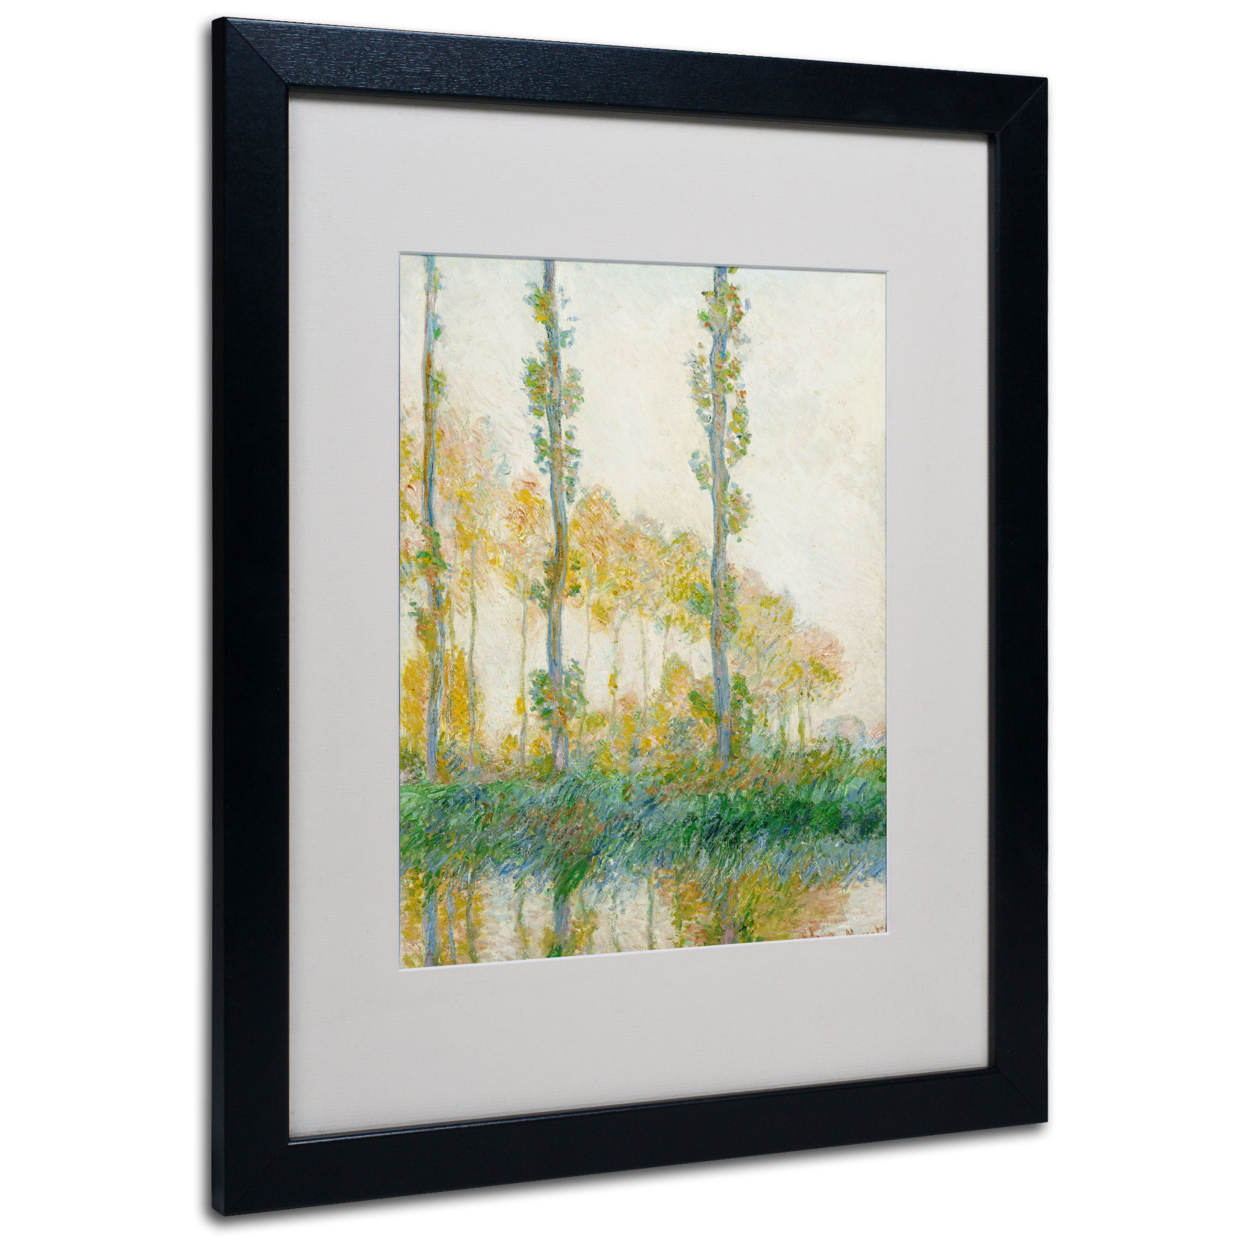 Claude Monet 'The Three Trees Autumn' Black Wooden Framed Art 18 X 22 Inches